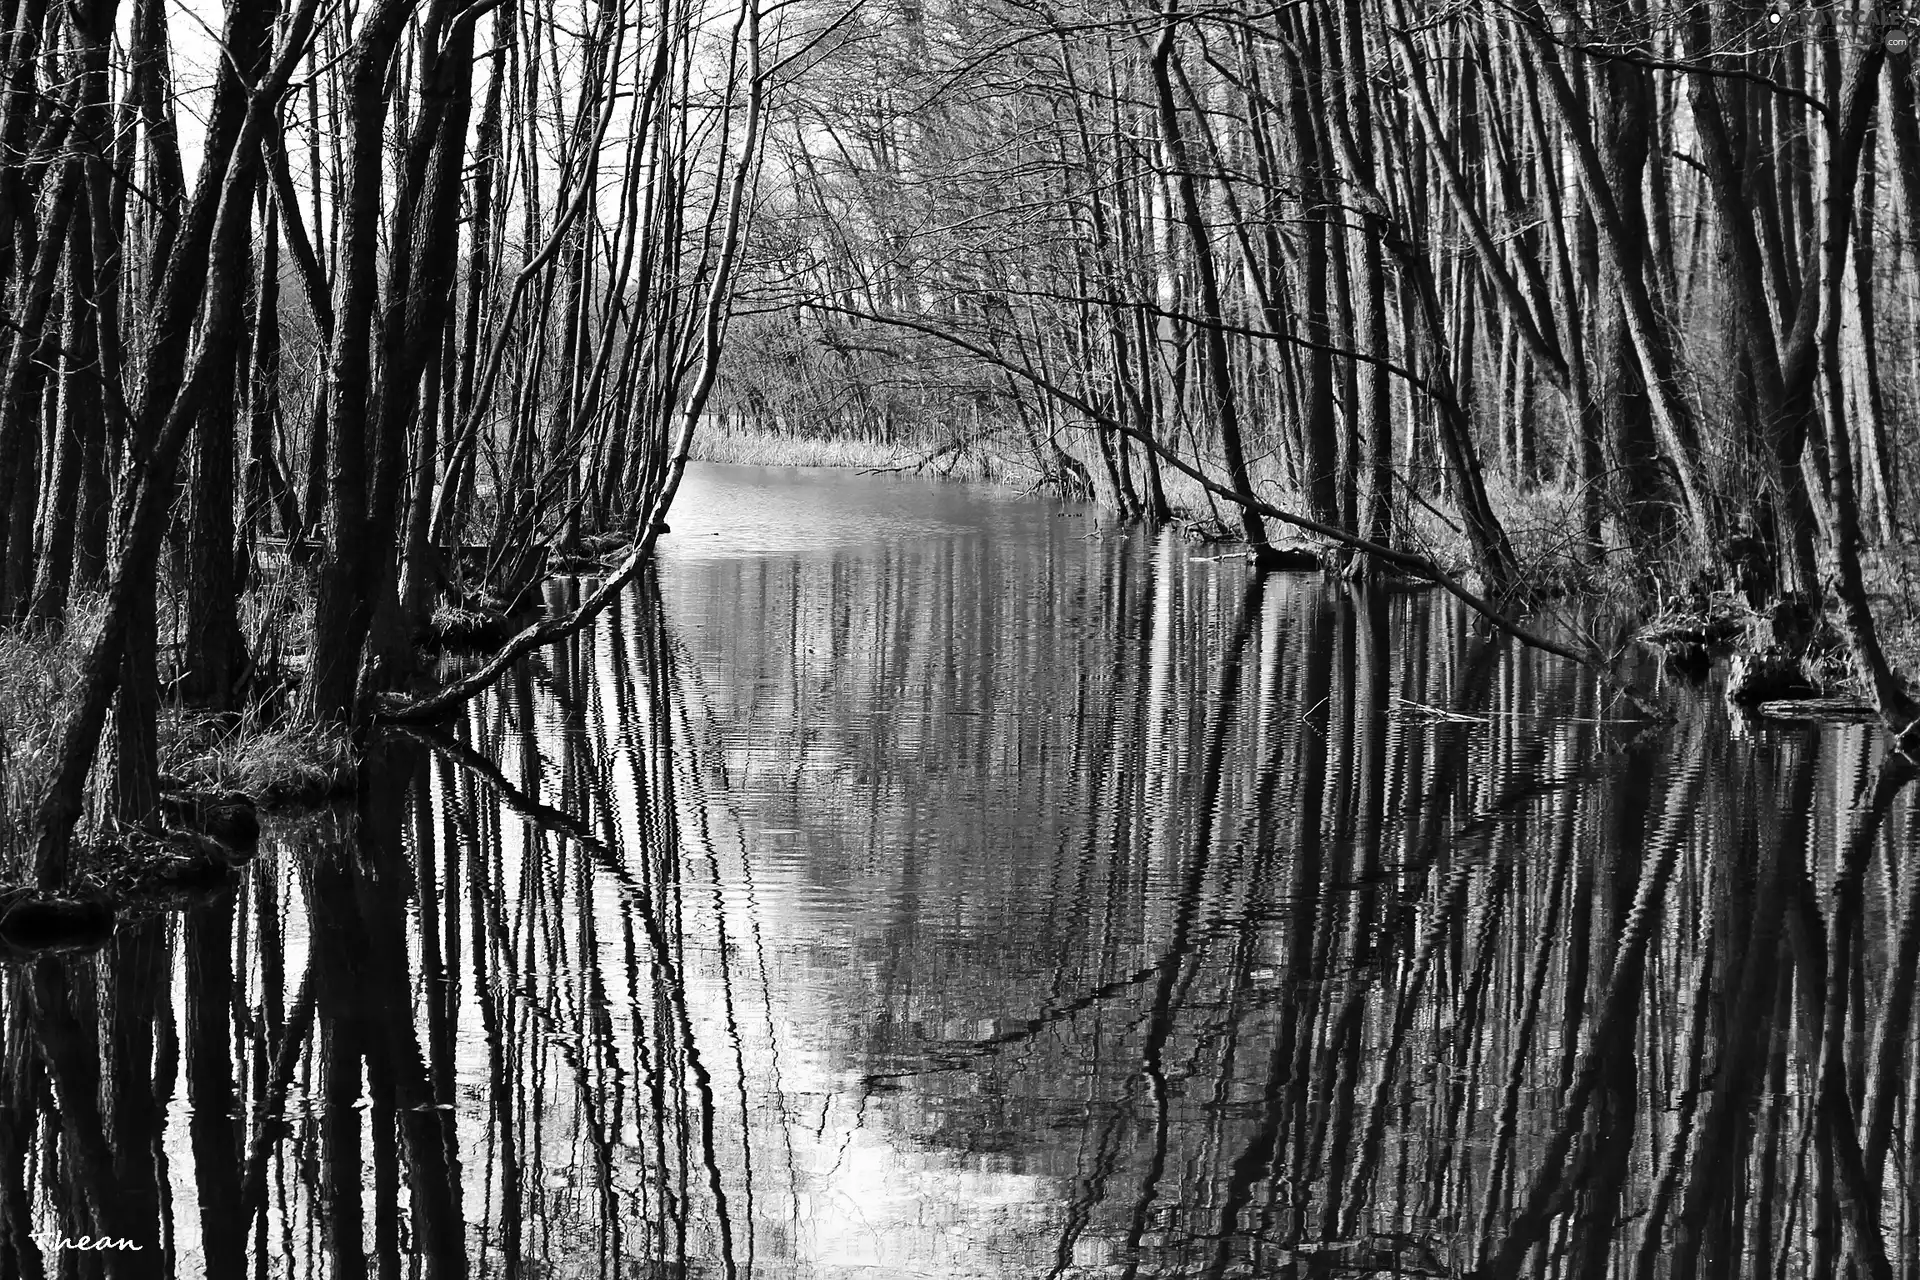 ##, water, forest, reflection, lake